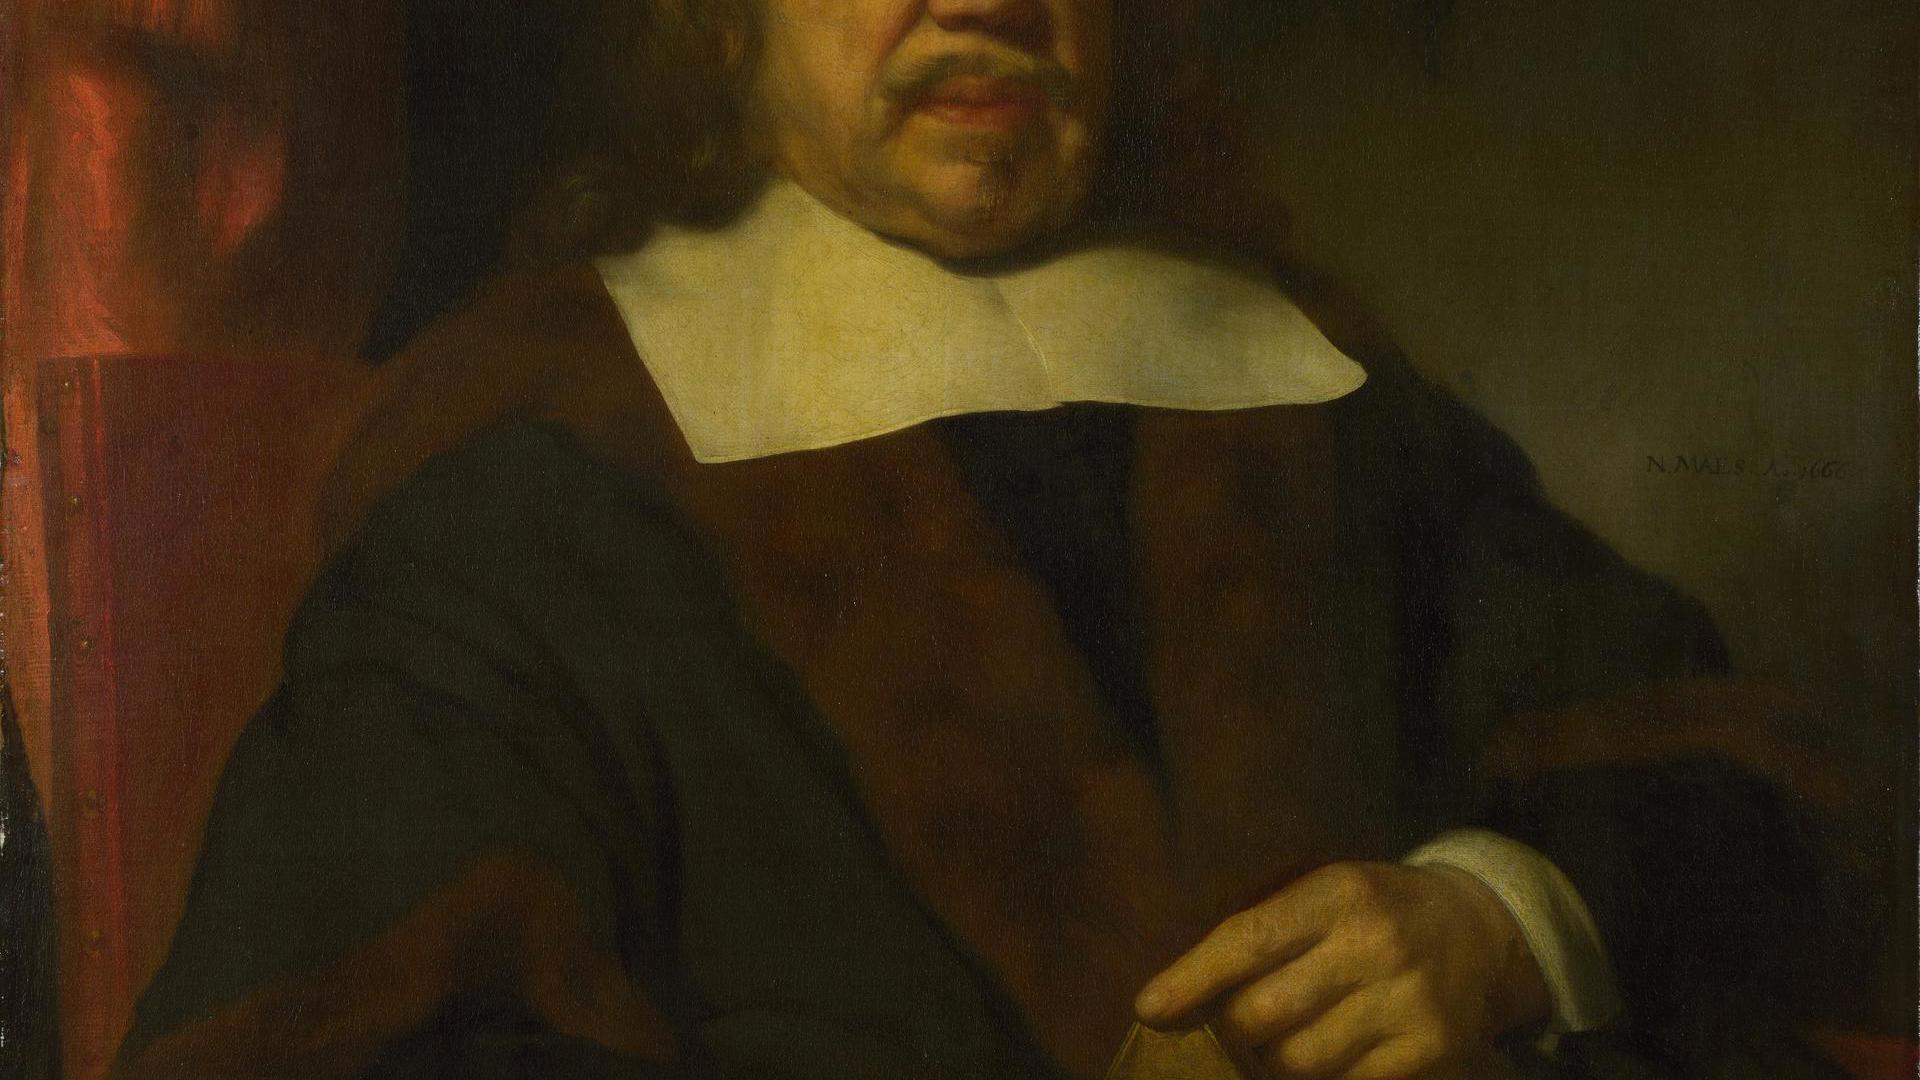 Portrait of an Elderly Man in a Black Robe by Nicolaes Maes